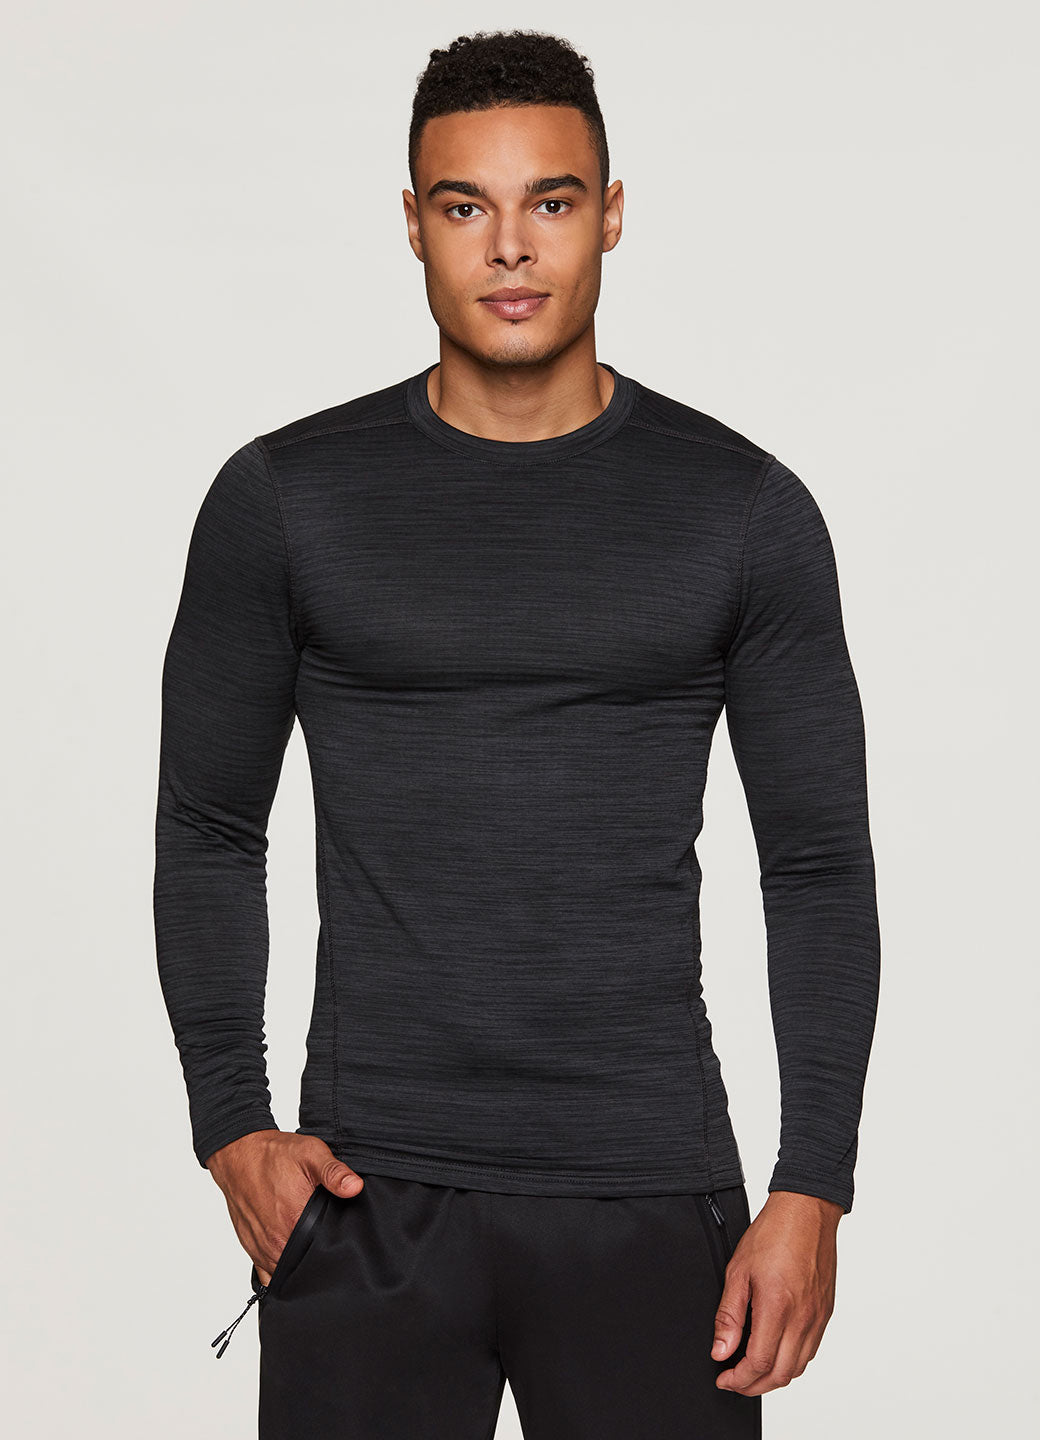 Stratus Fleece Lined Compression Base Layer Tee